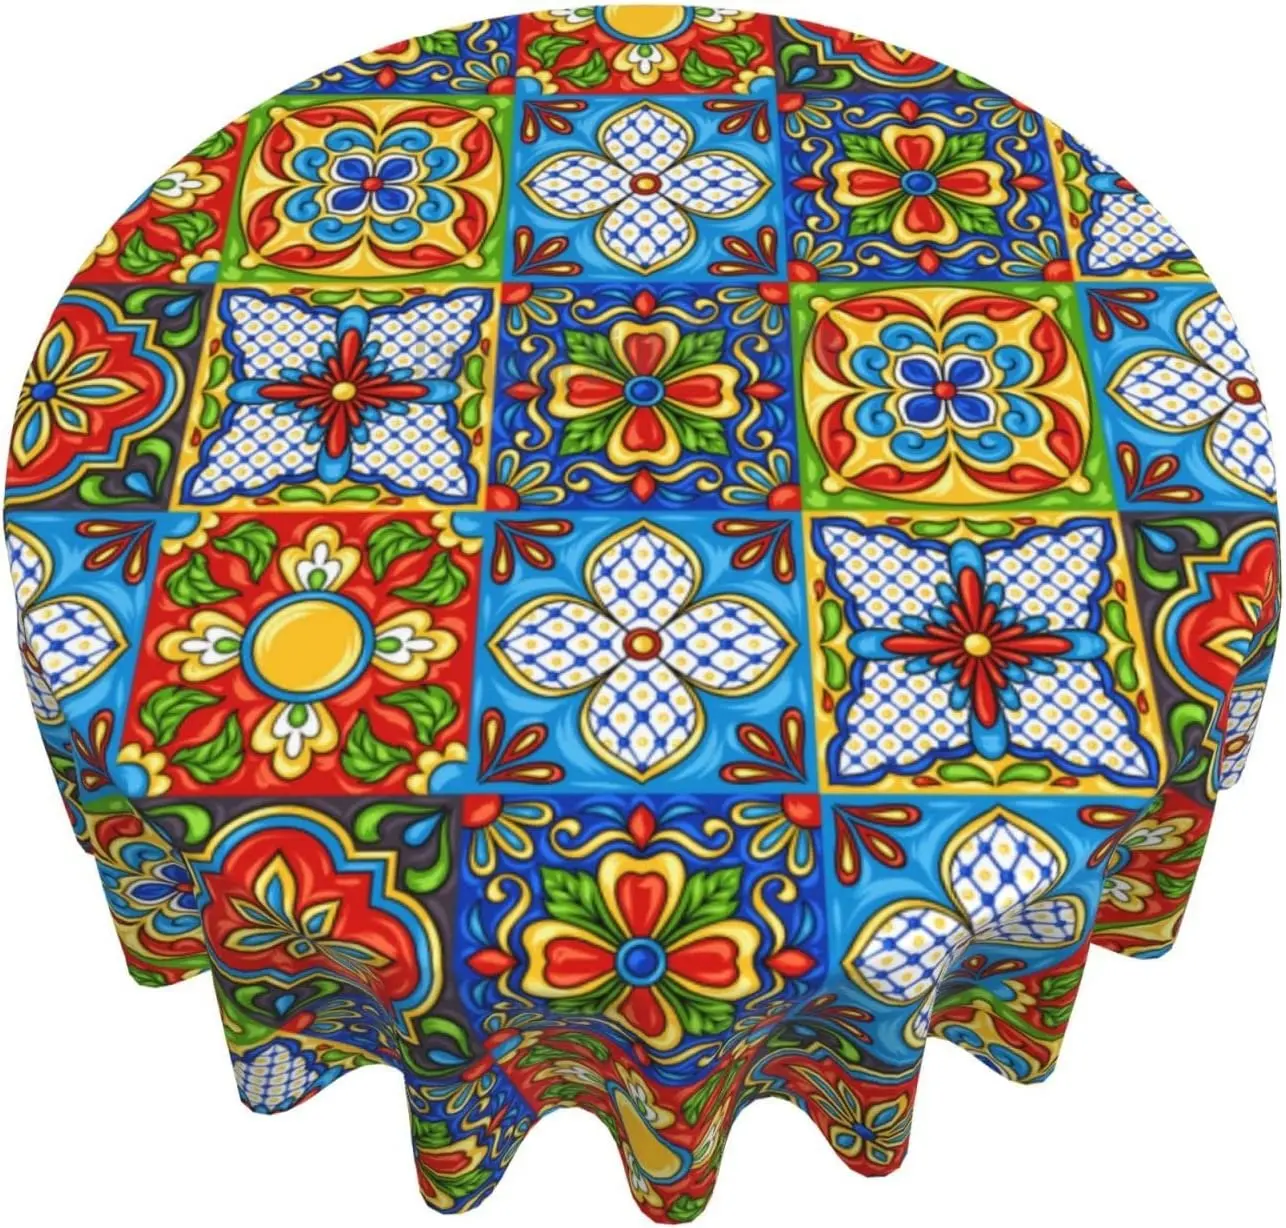 

Mexican Talavera Tablecloth Mexican Ceramic Tile Round Table Cloths Circular Table Cover Waterproof Wipeable Polyester Tabletop